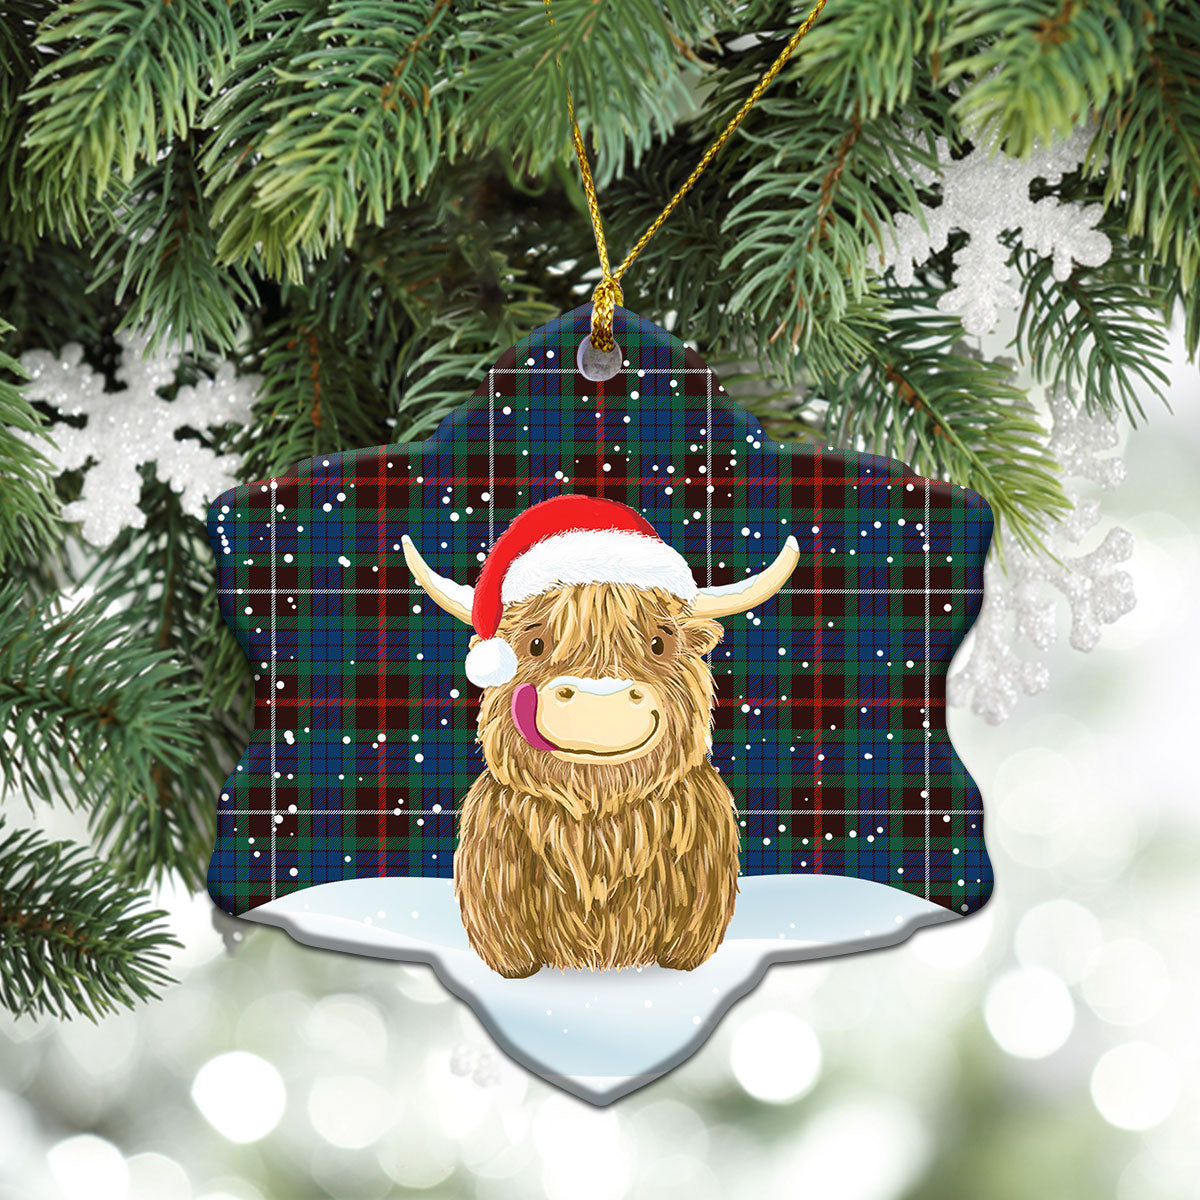 Fraser (of Lovat) Hunting Ancient Tartan Christmas Ceramic Ornament - Highland Cows Style